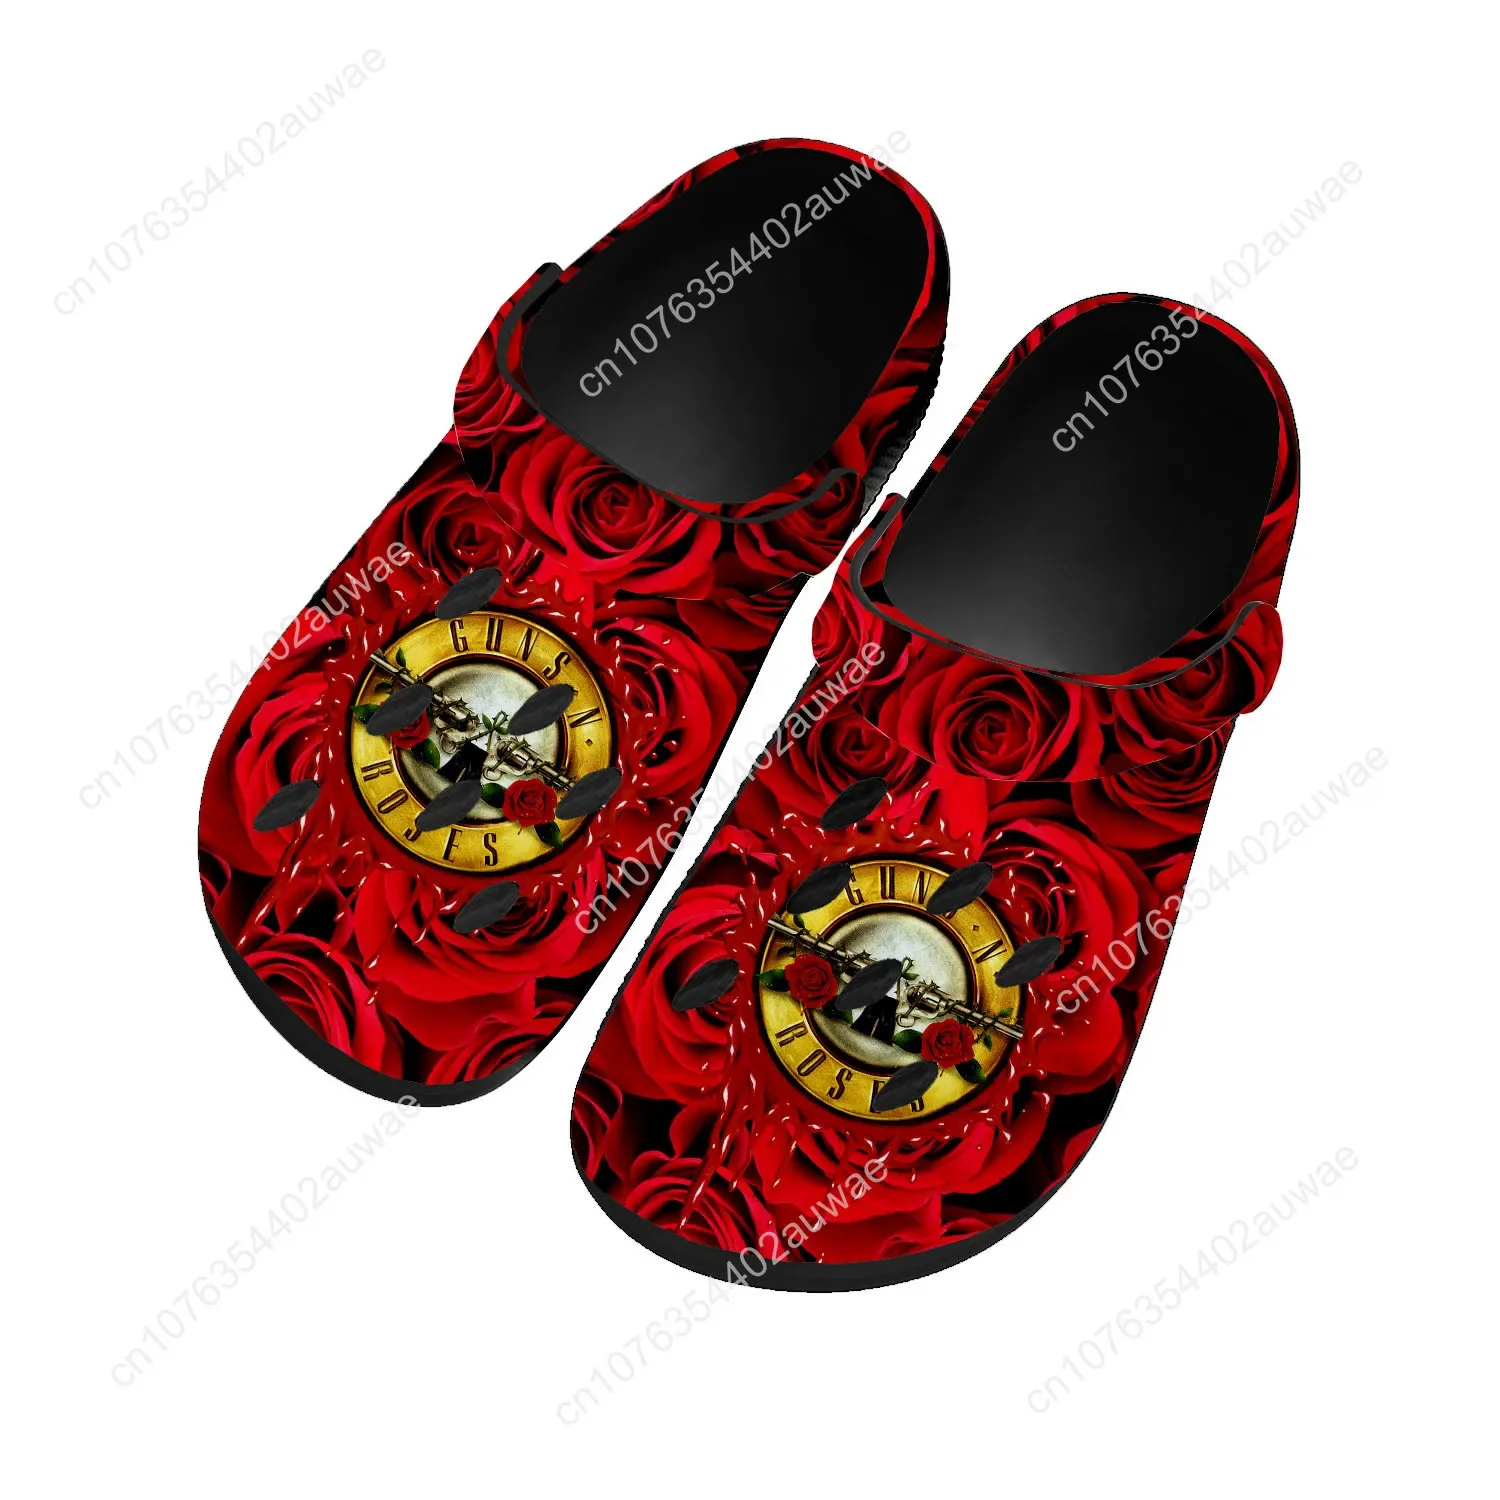 

Guns N Roses Metal Rock Band Home Clogs Custom Water Shoes Mens Womens Teenager Sandals Garden Clog Breathable Hole Slippers